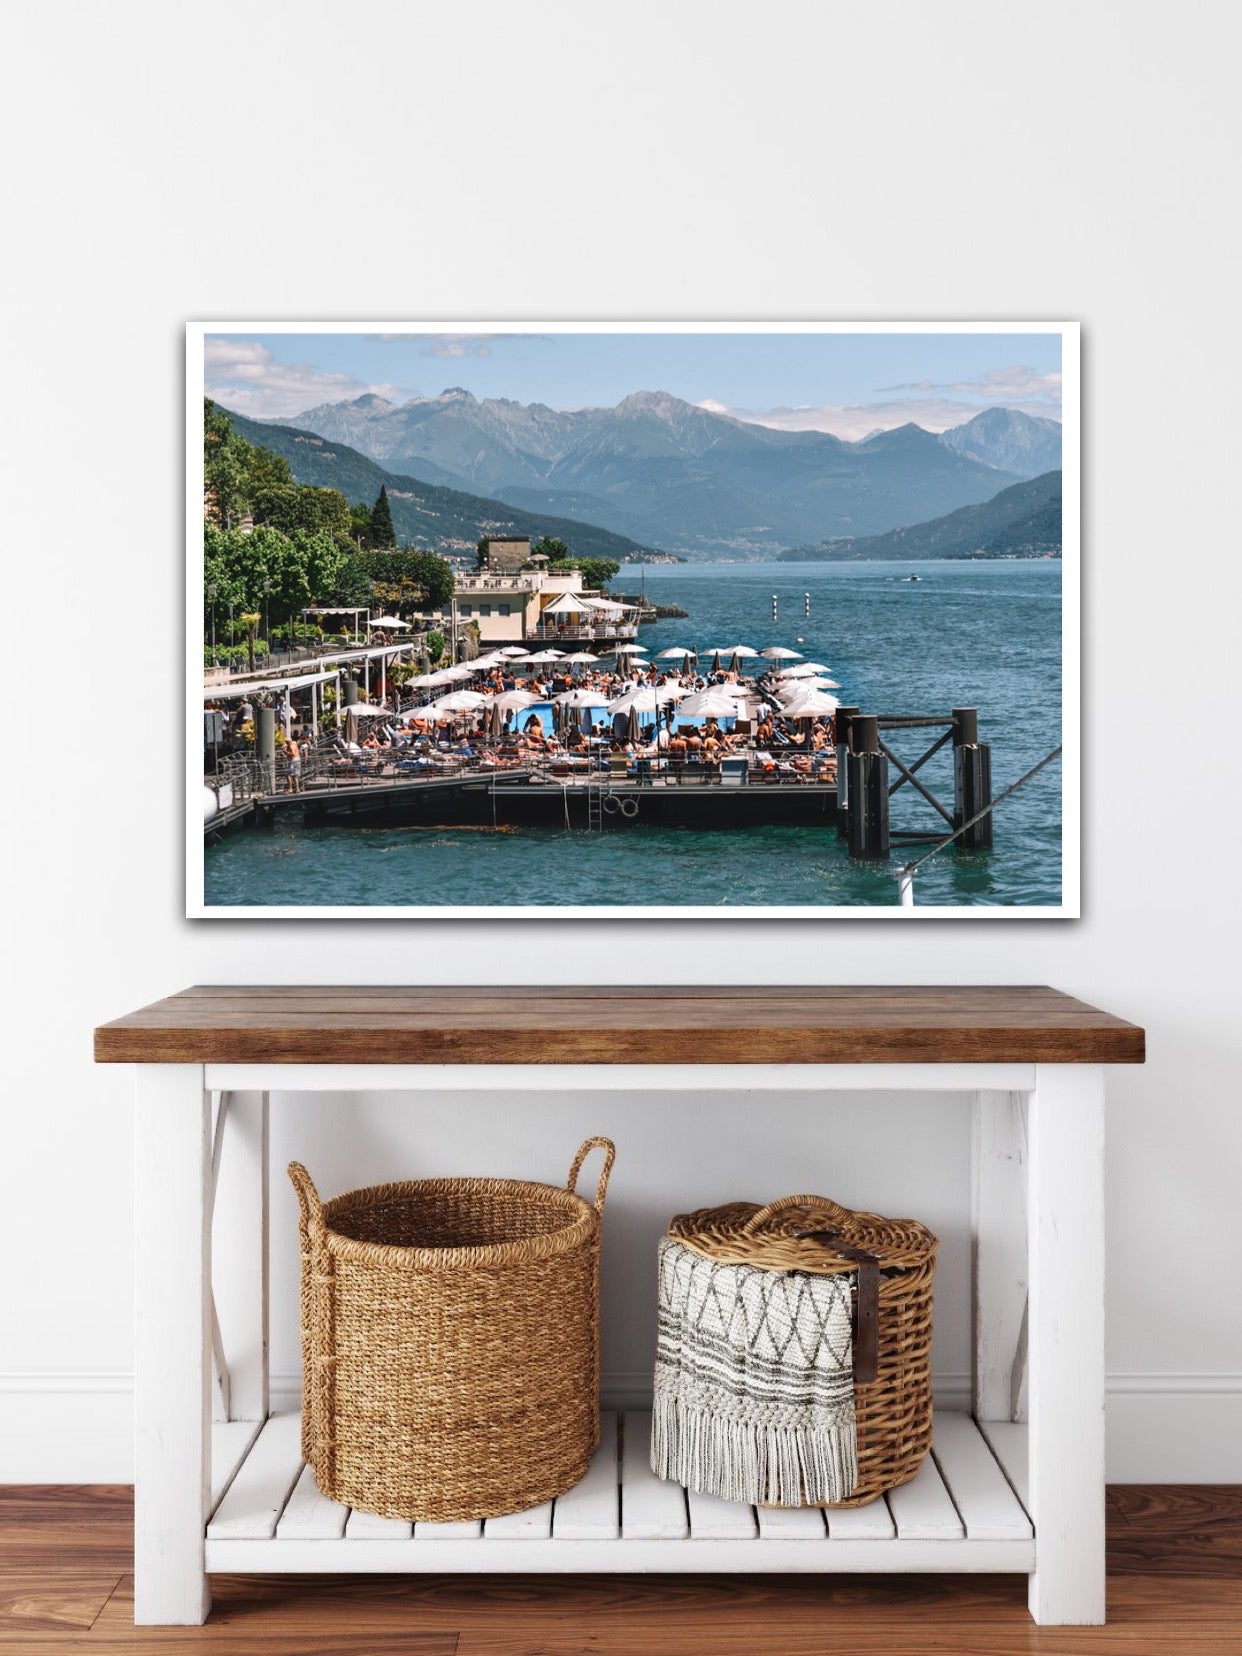 Floating pool and beach club at Griante,  Lake Como. It is one of the most popular swimming spots on Lake Como or Italians on their summer vacation. Interior design home decor Fine Art Photographic Print.